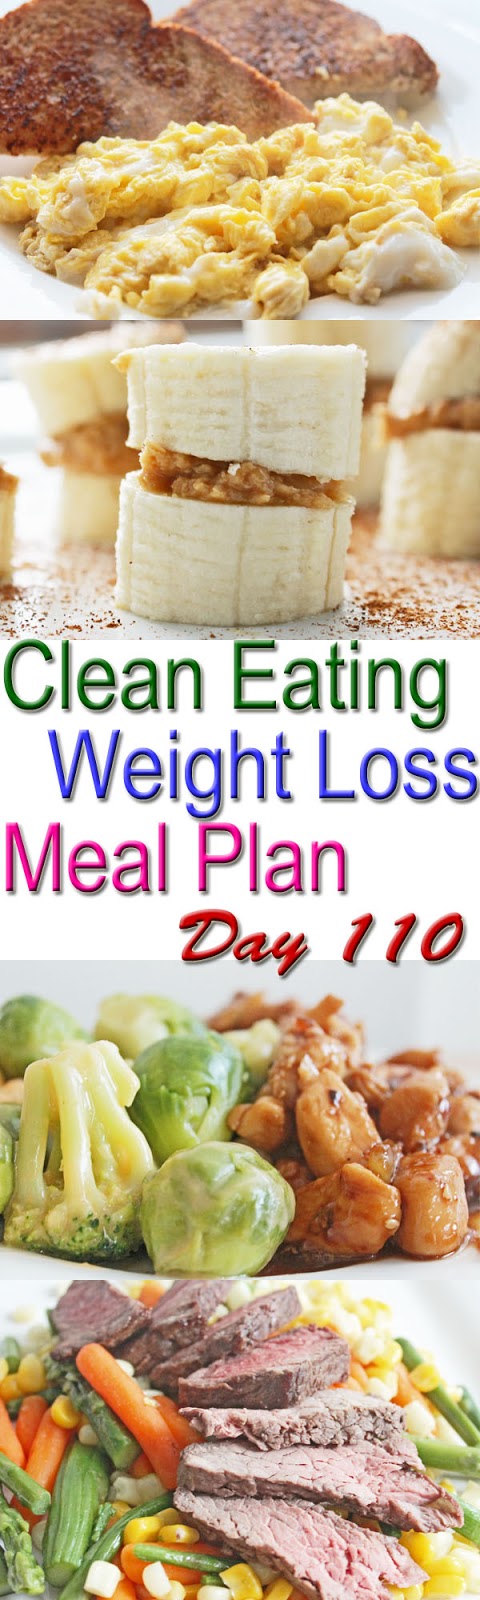 easy meal planning for weight loss on a budget